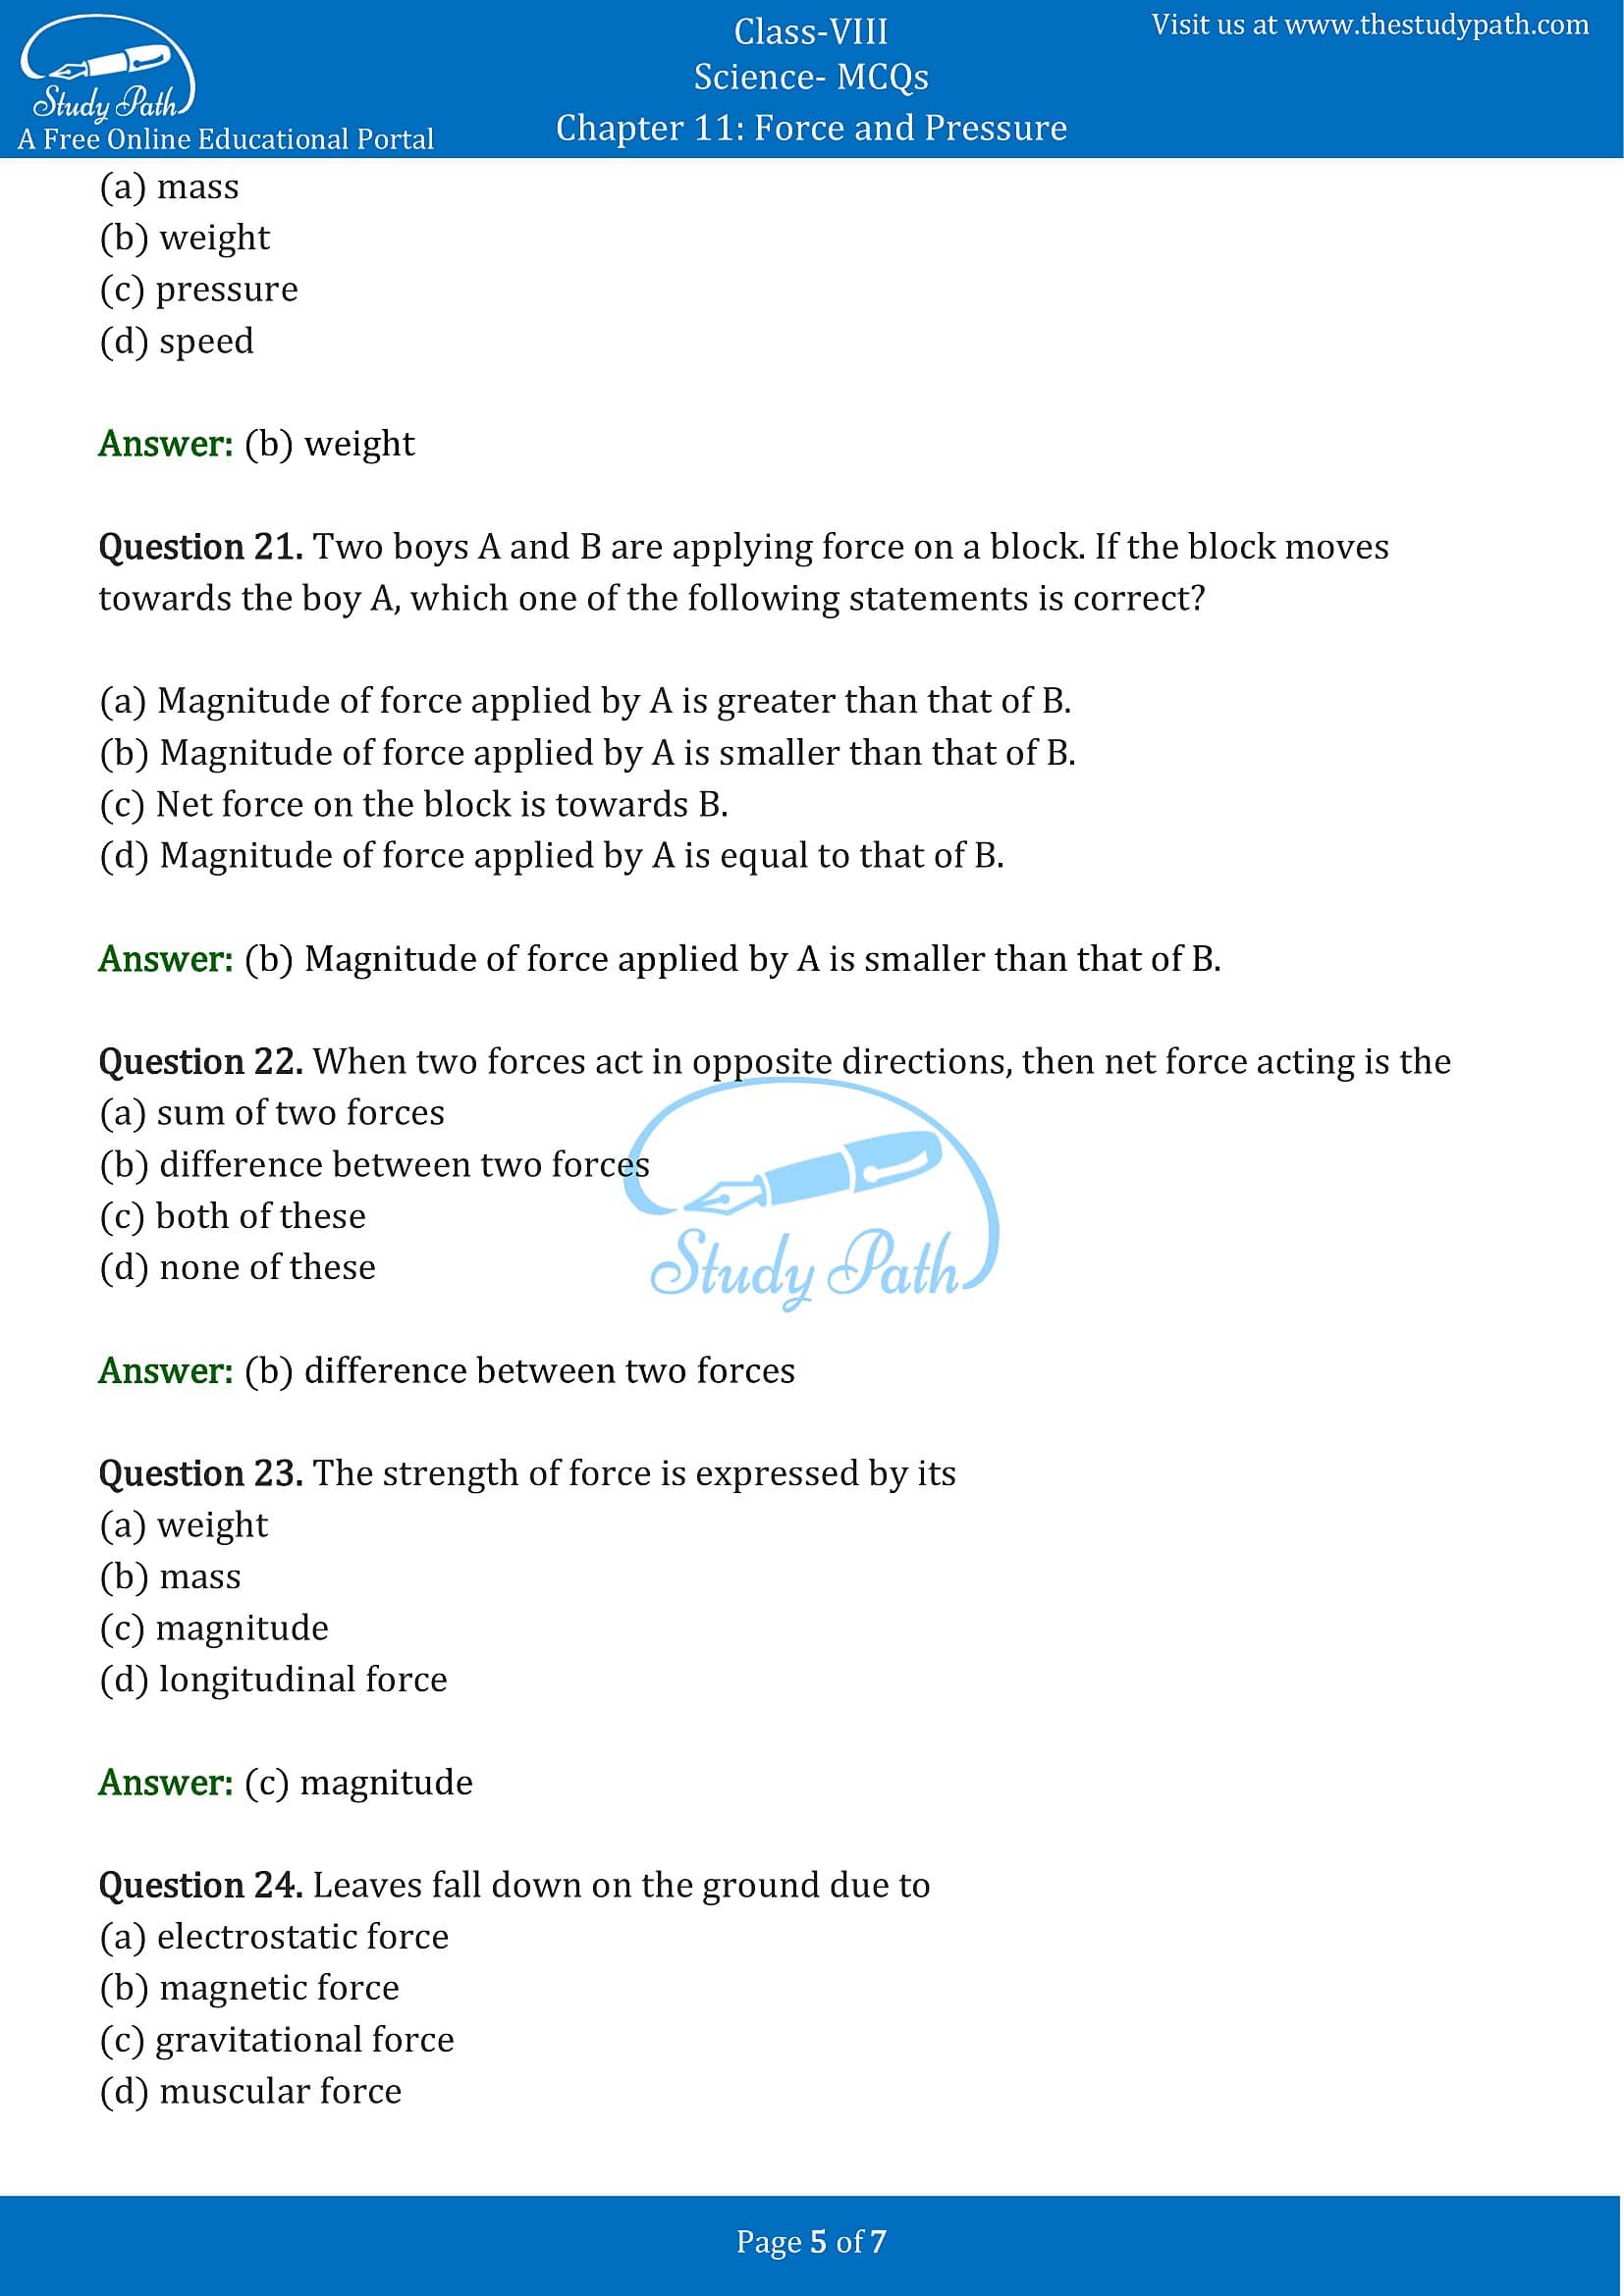 MCQ Questions for Class 8 Science Chapter 11 Force and Pressure with Answers PDF -5